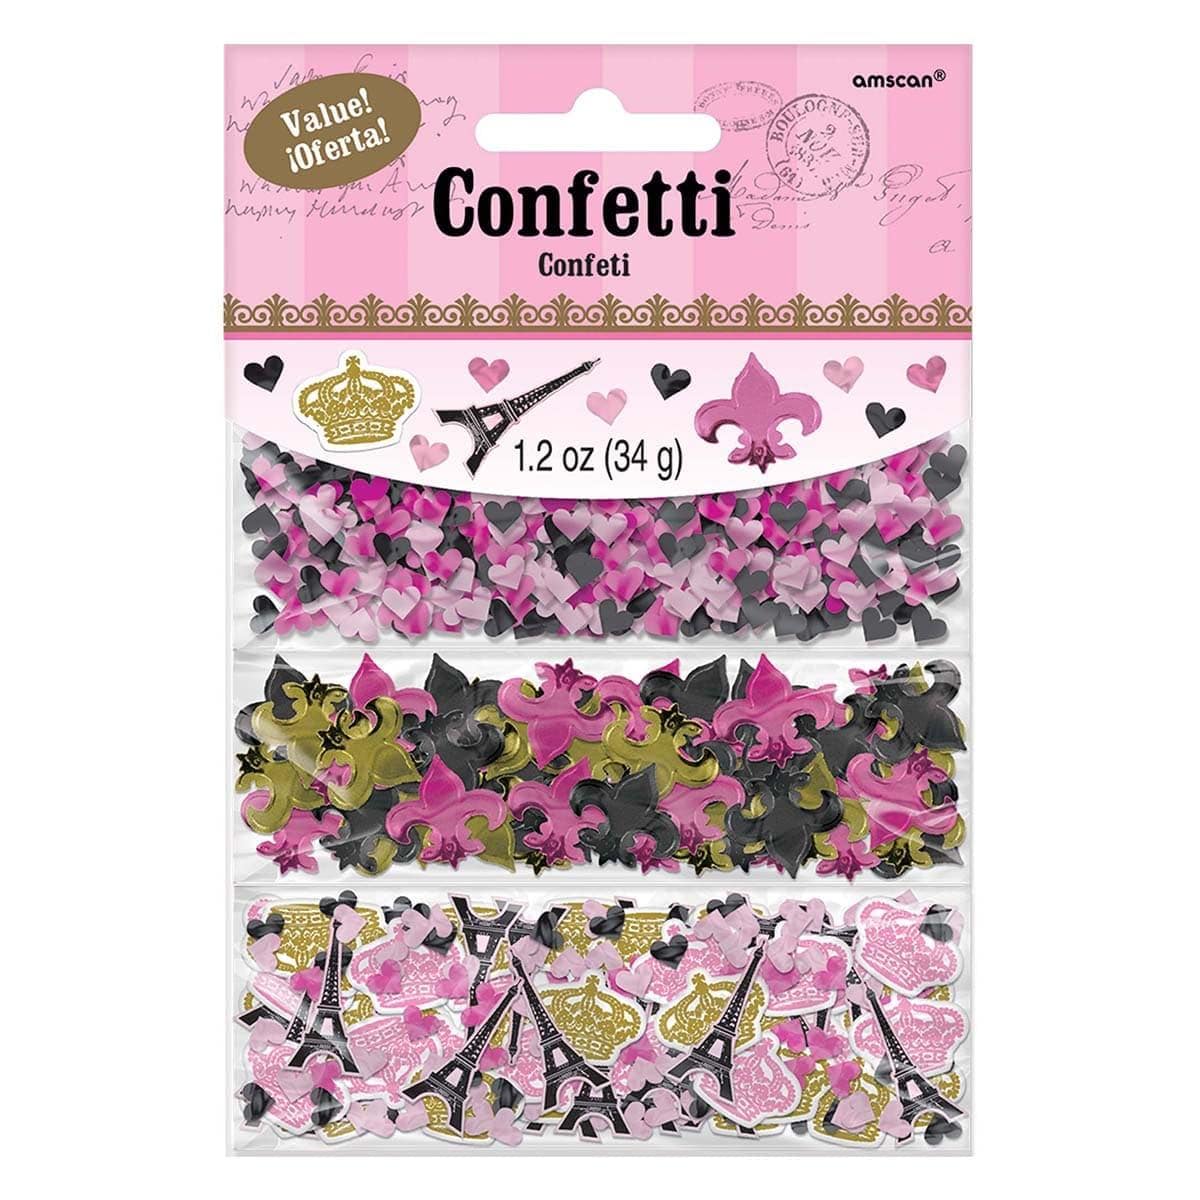 Buy Theme Party Day In Paris Confetti sold at Party Expert